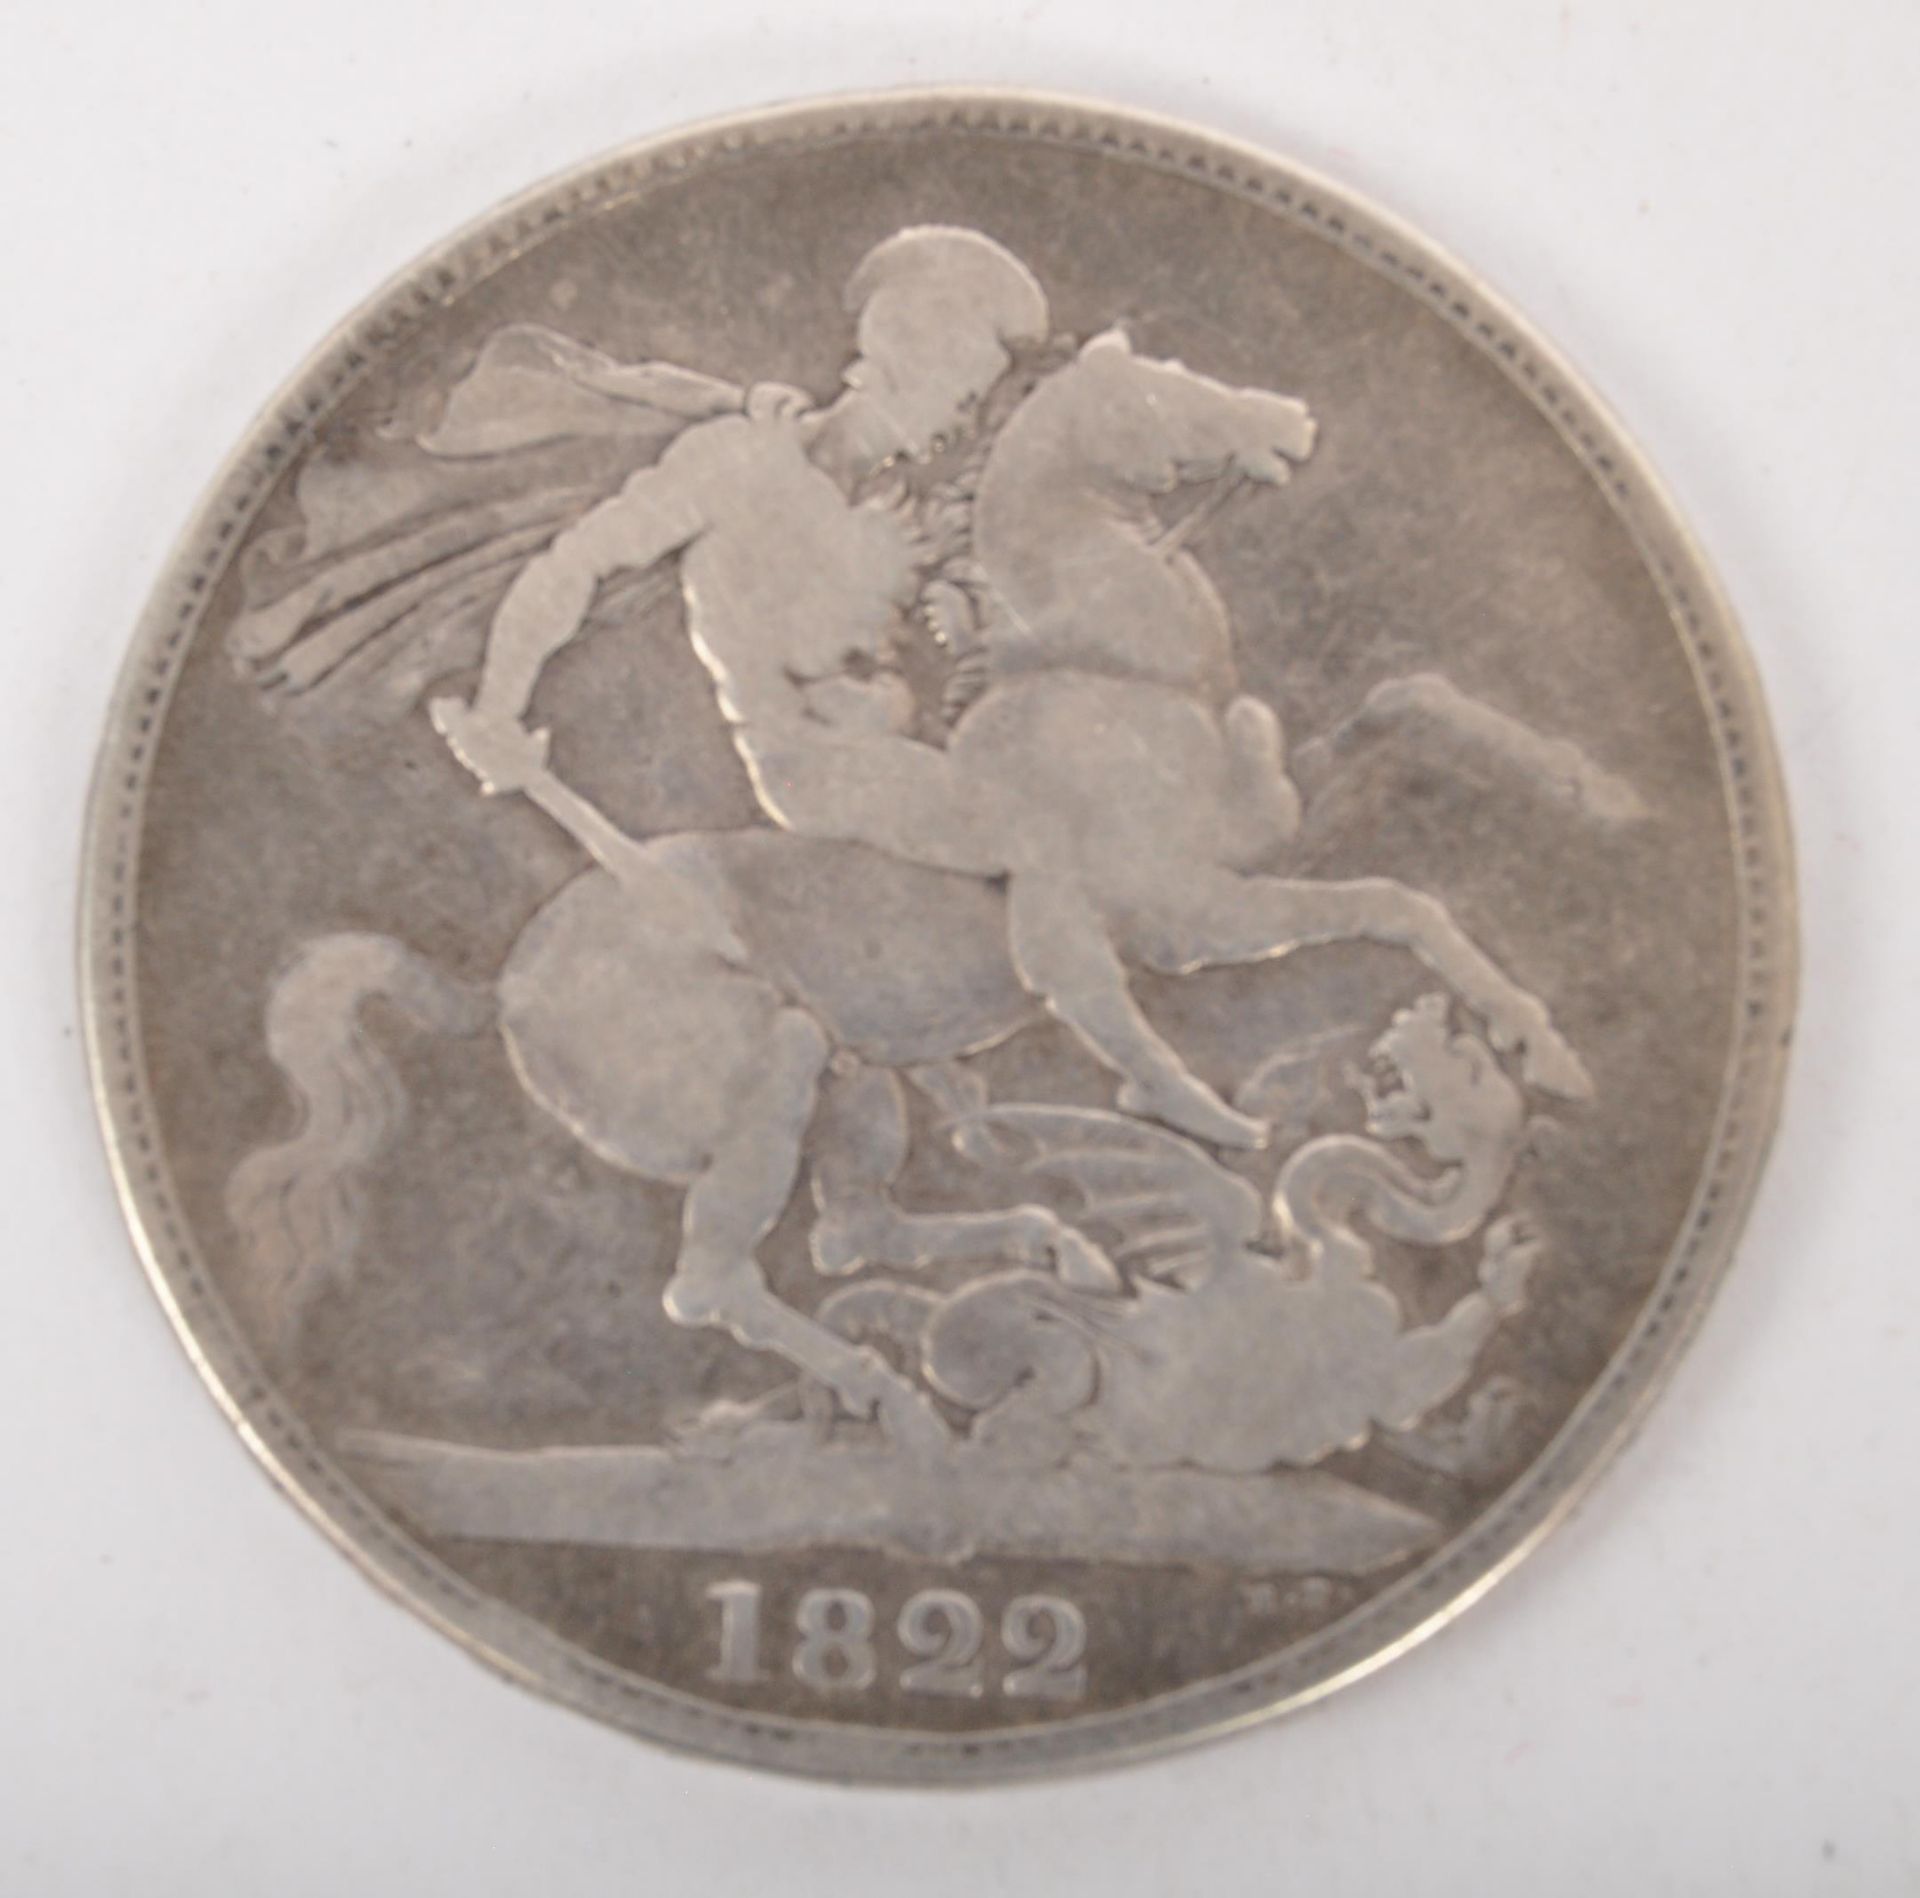 EARLY 19TH CENTURY 1822 GEORGE III SILVER CROWN COIN - Image 2 of 4